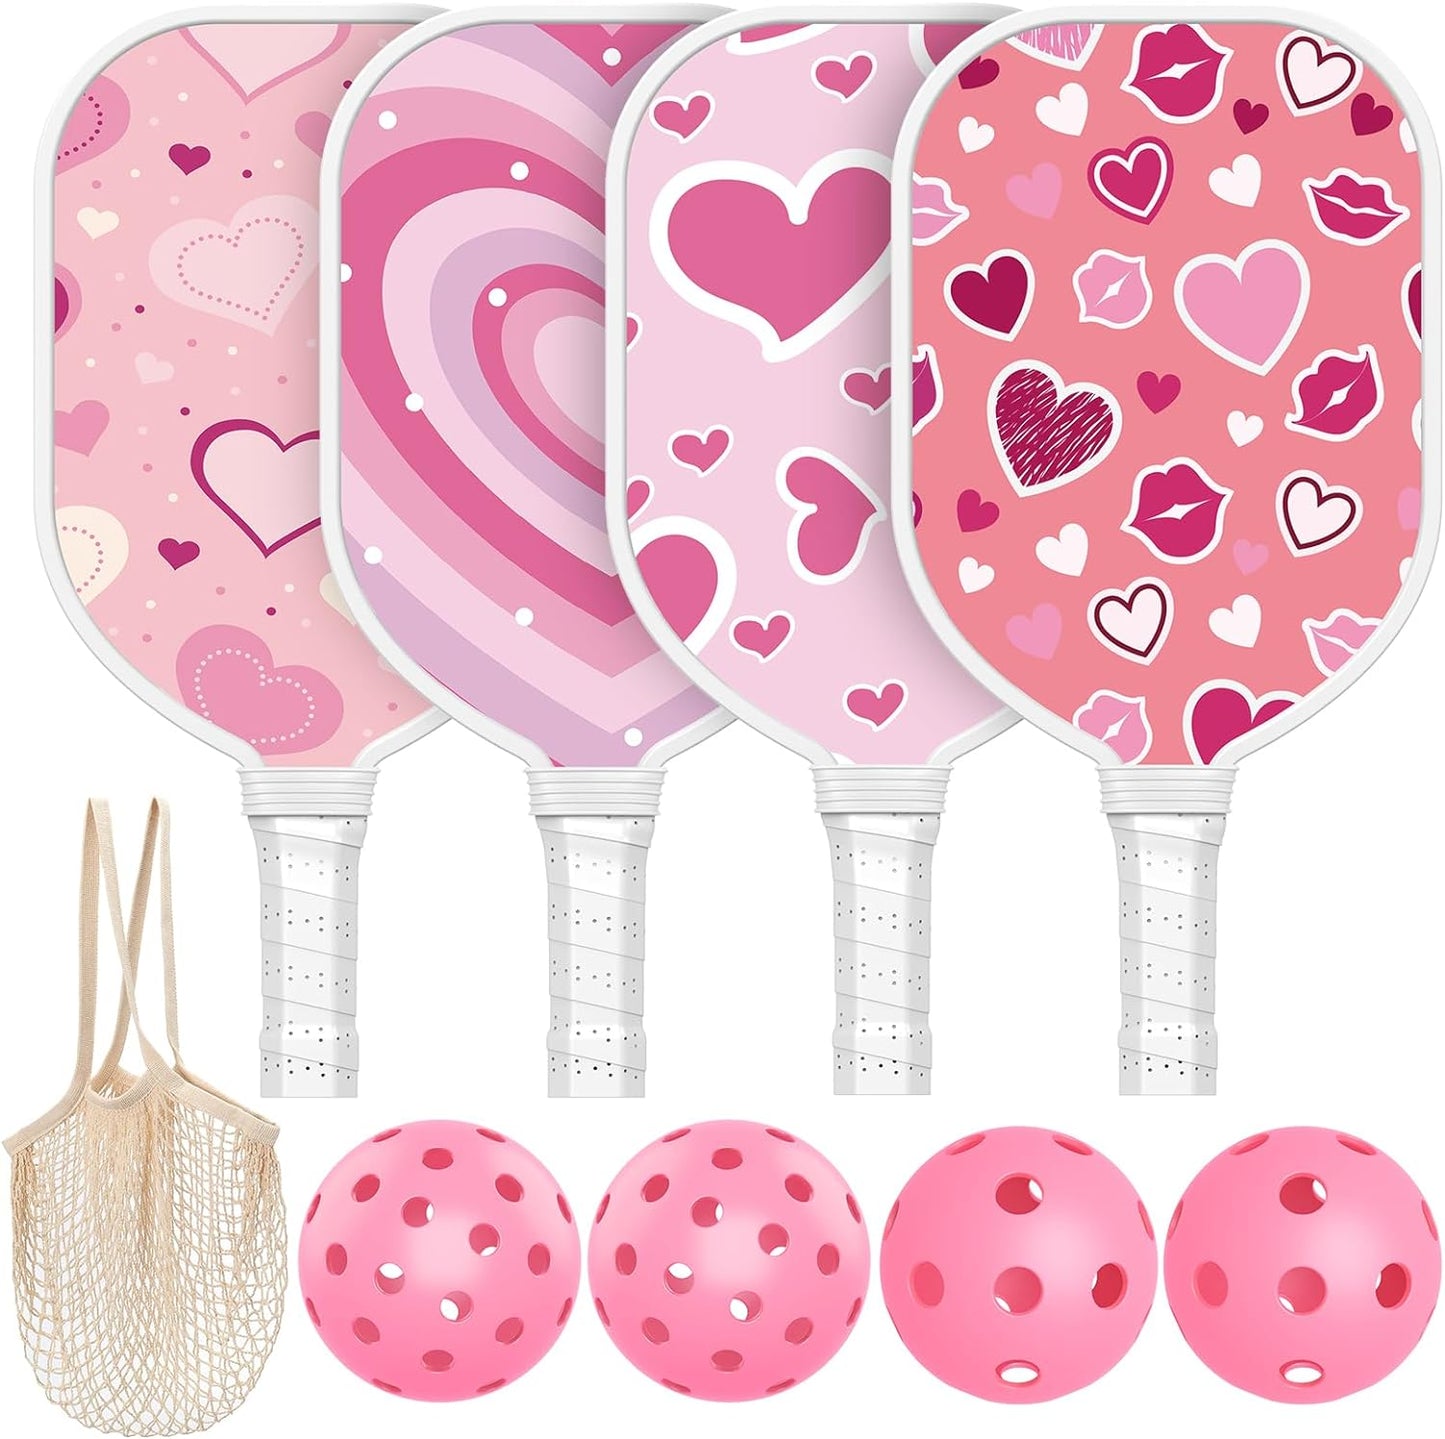 Sprypals Premium Pink Pickleball Paddles Set of 4